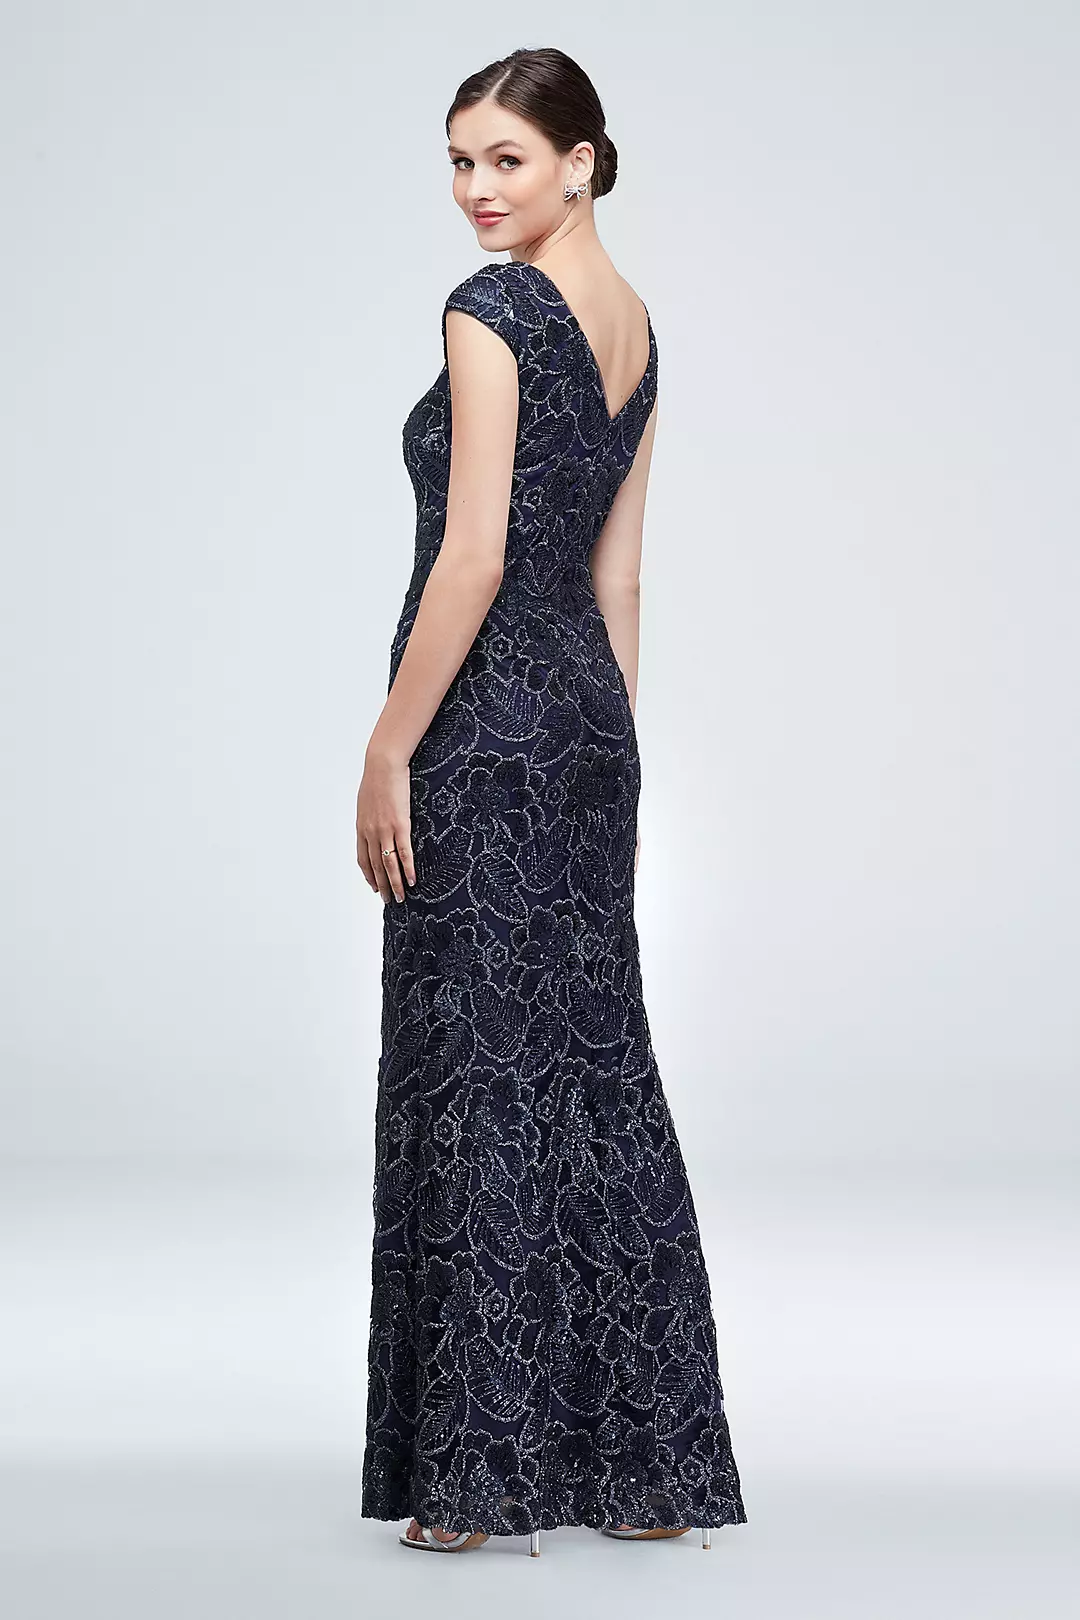 Sequin Floral Lace Overlay Cap Sleeve Gown Image 2